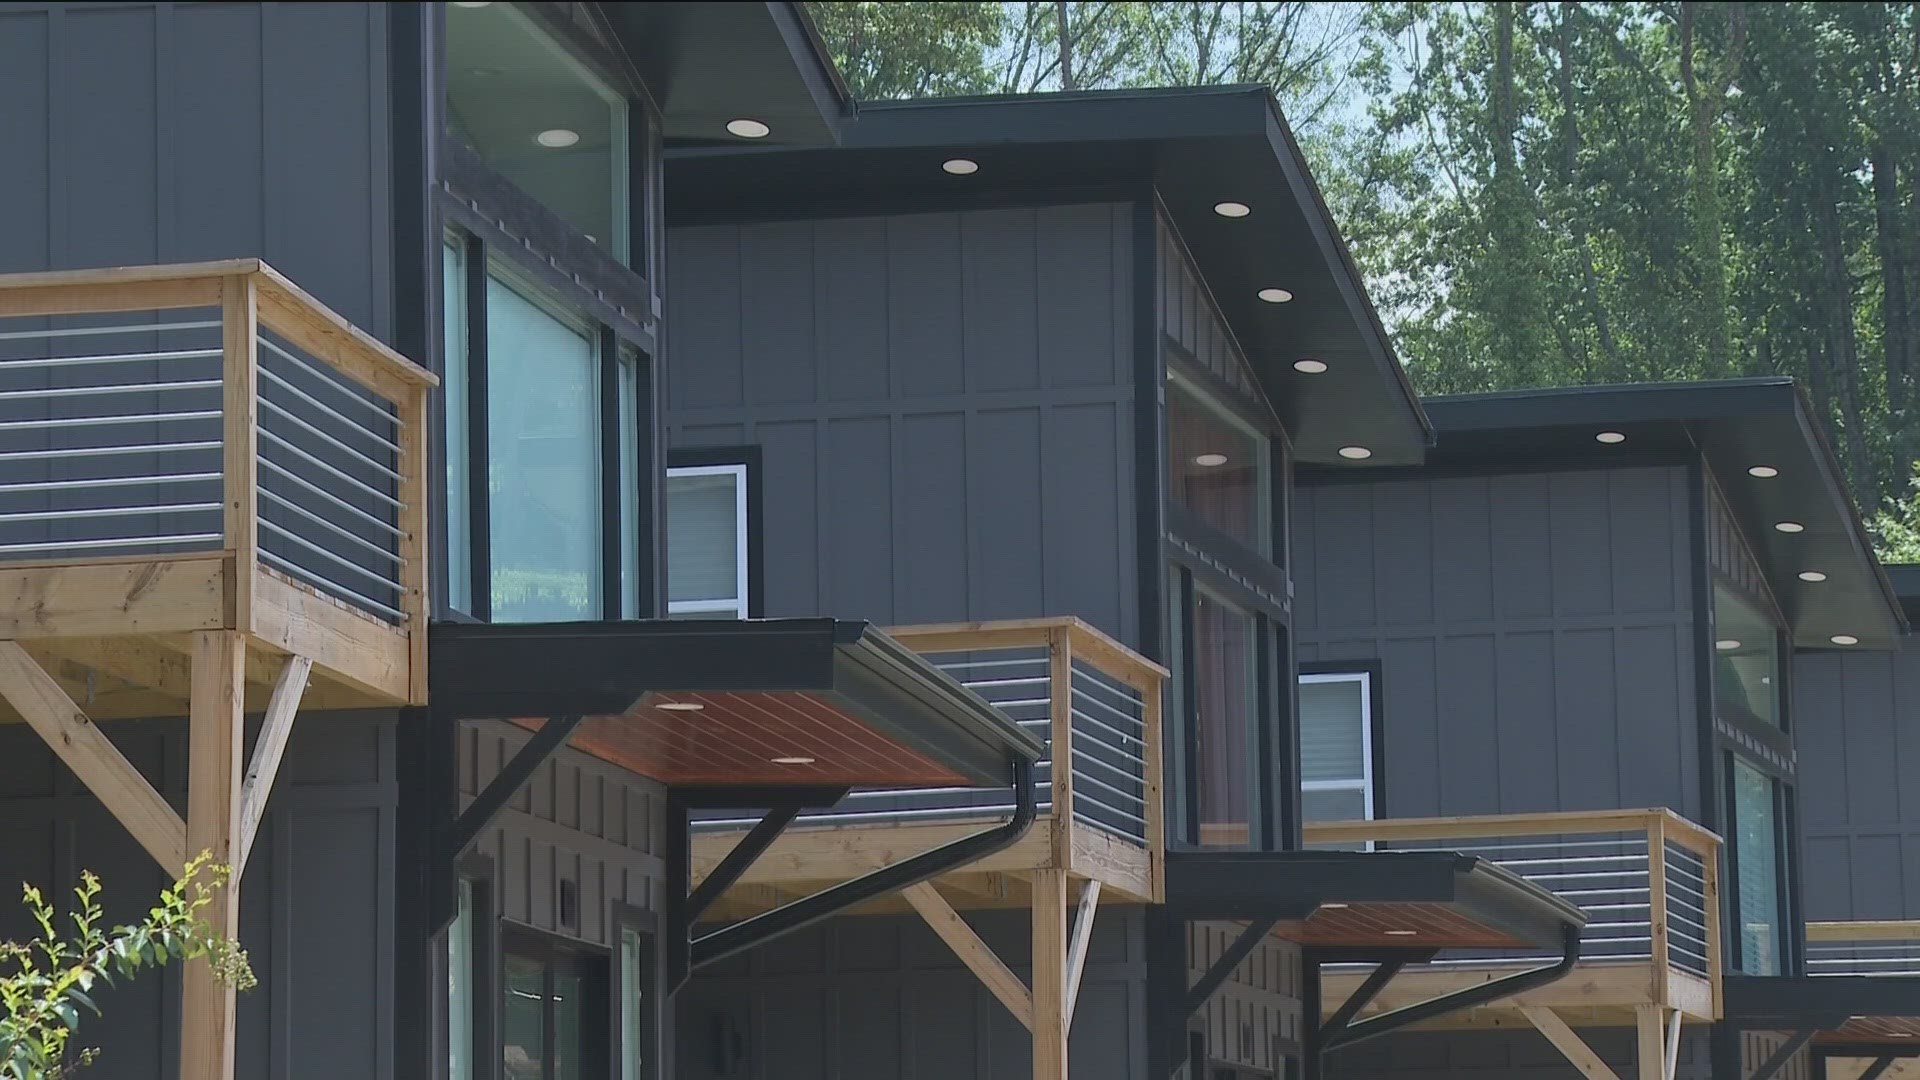 Living Small In The City: Micro-Housing Gets Big w/ South Park Cottages —  The Luxe List Atlanta